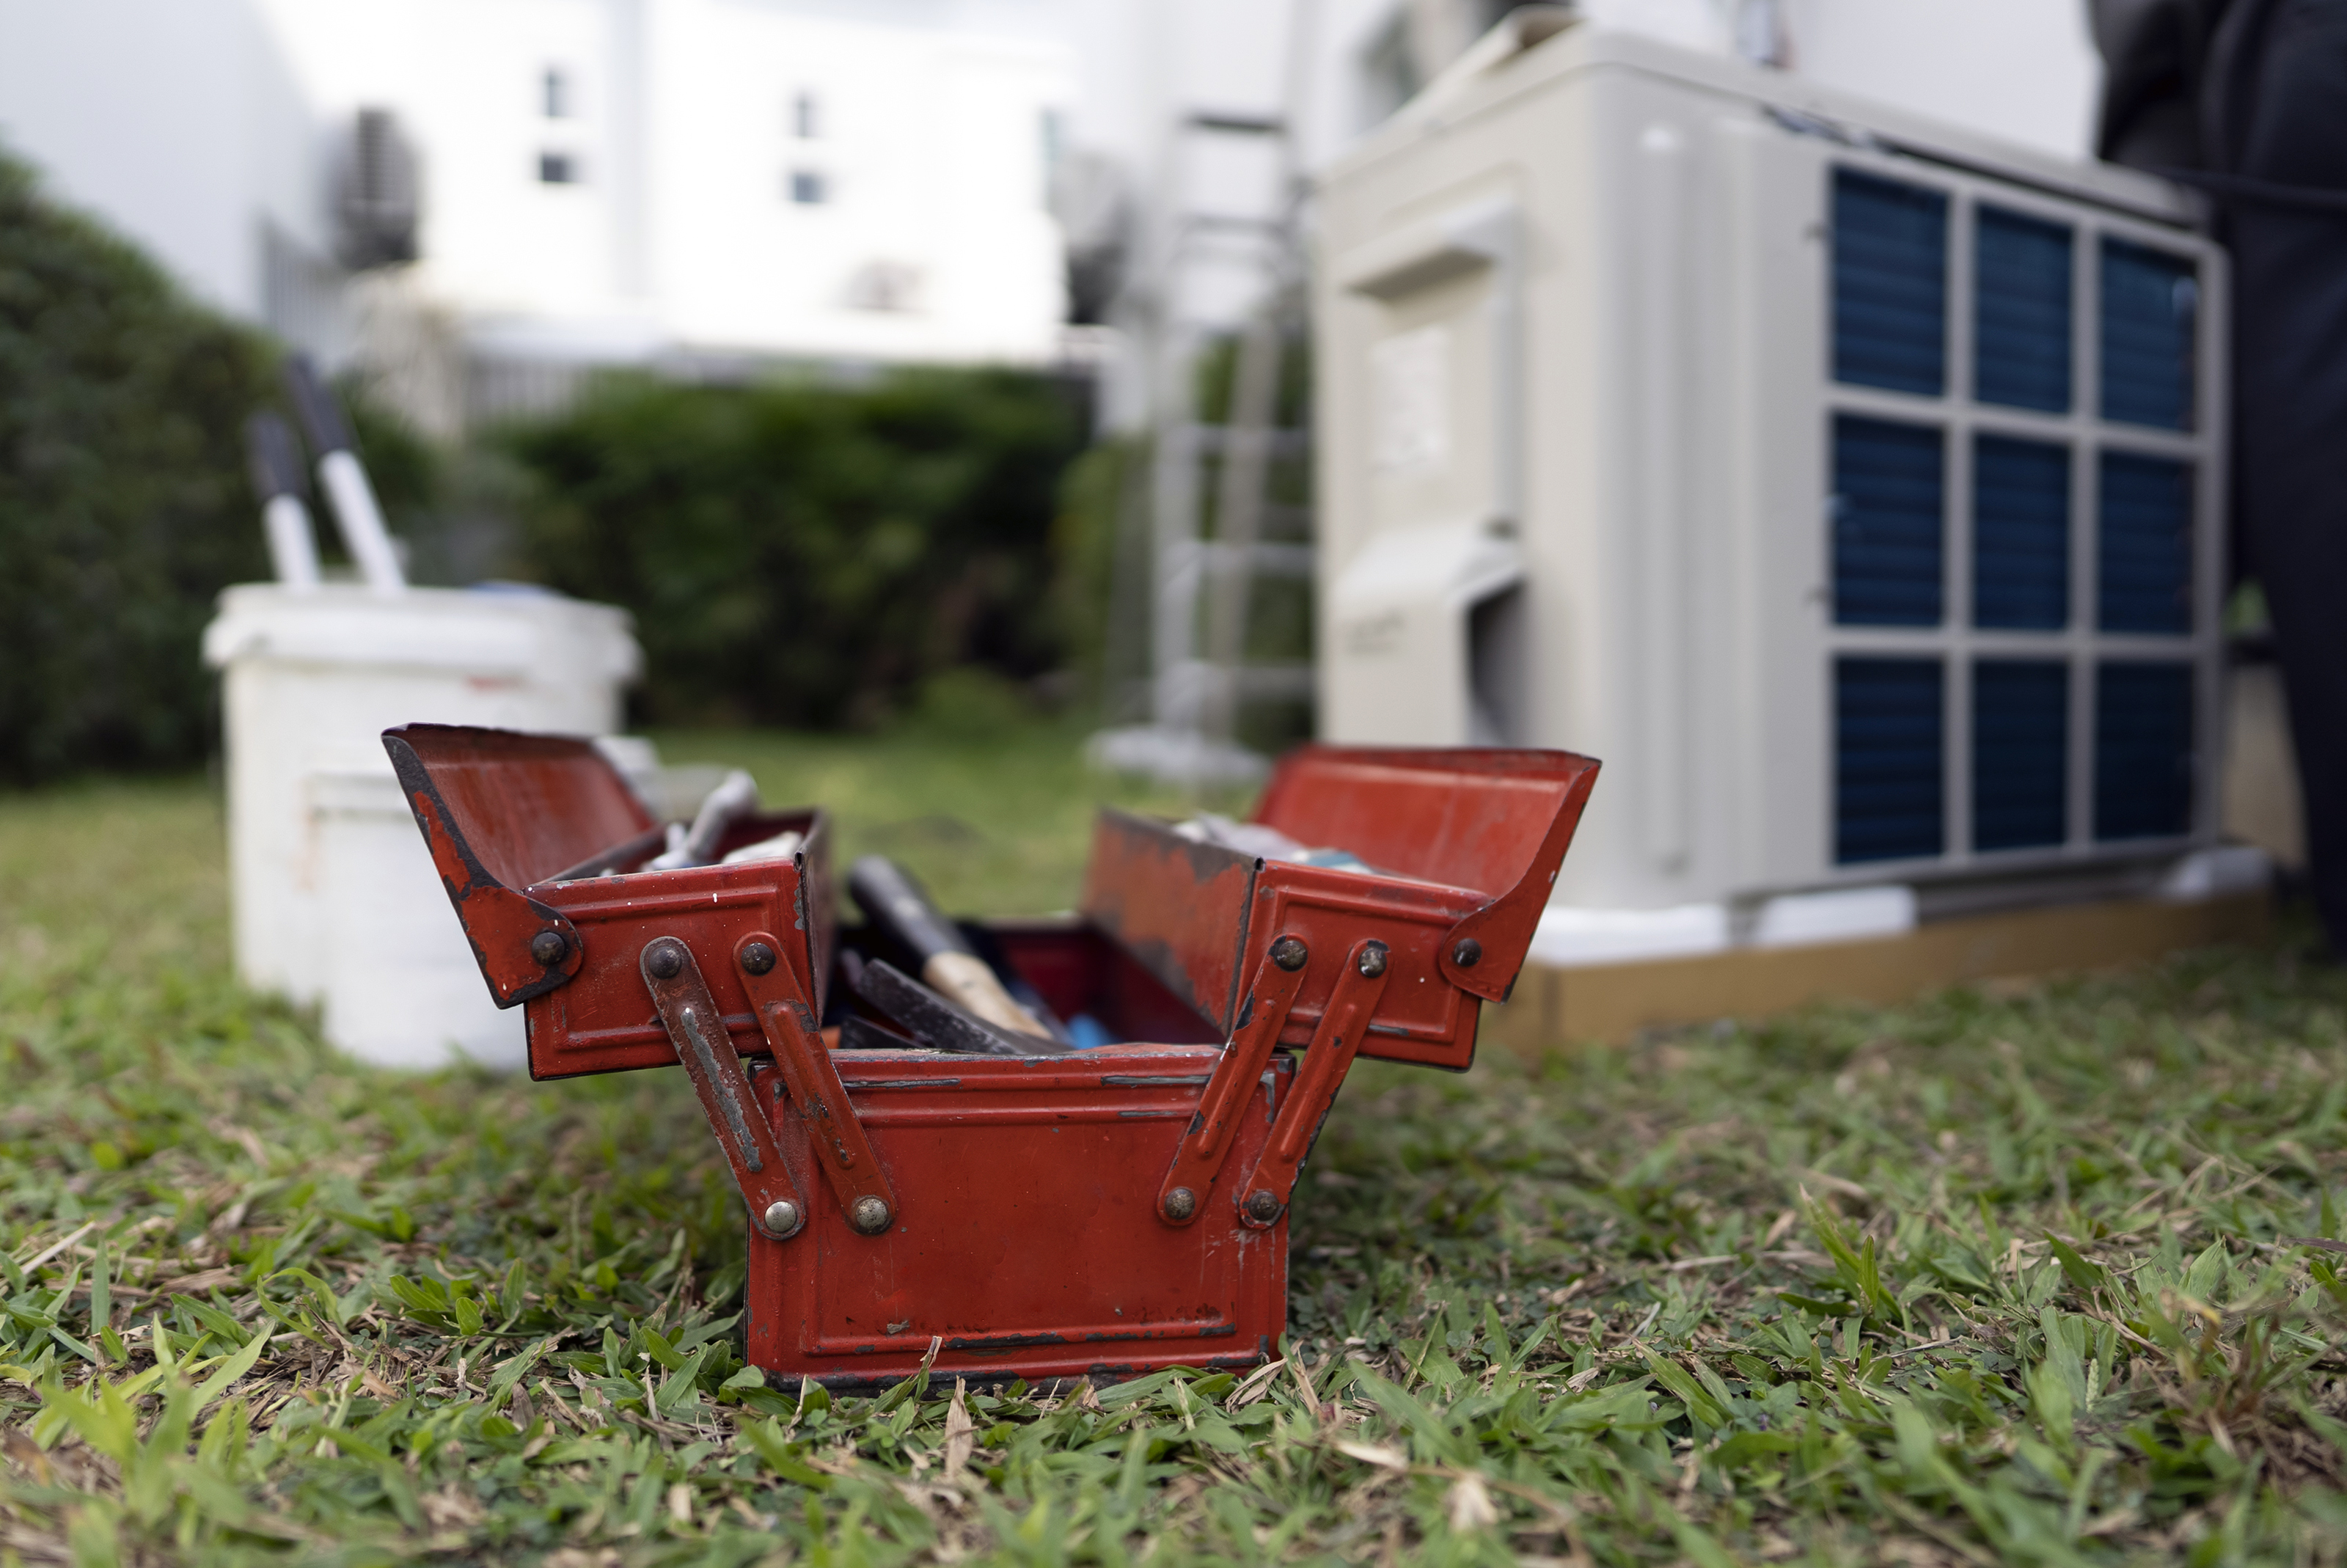 https://www.houselogic.com/wp-content/uploads/2022/08/repair-replace-is-it-time-vintage-red-metal-toolbox-on-grass-in-front-of-broken-air-conditioner.jpg